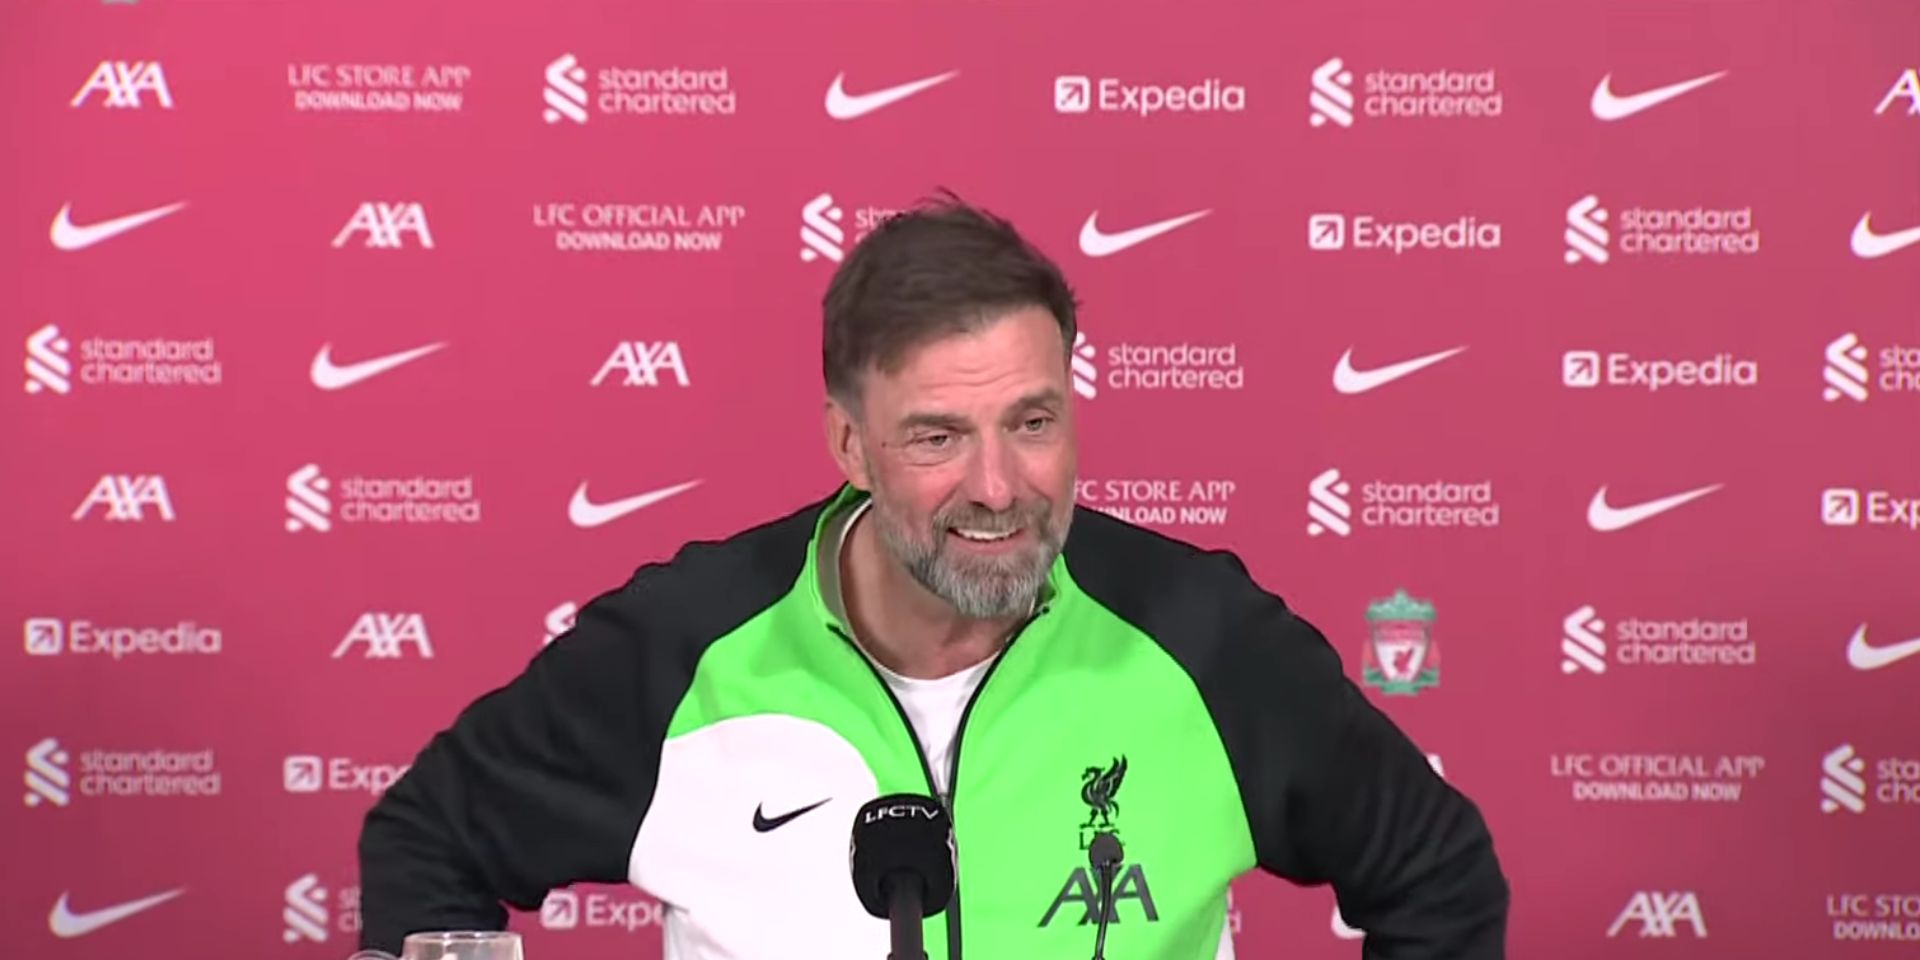 (Video) Klopp’s reaction after being congratulated for securing Champions League football